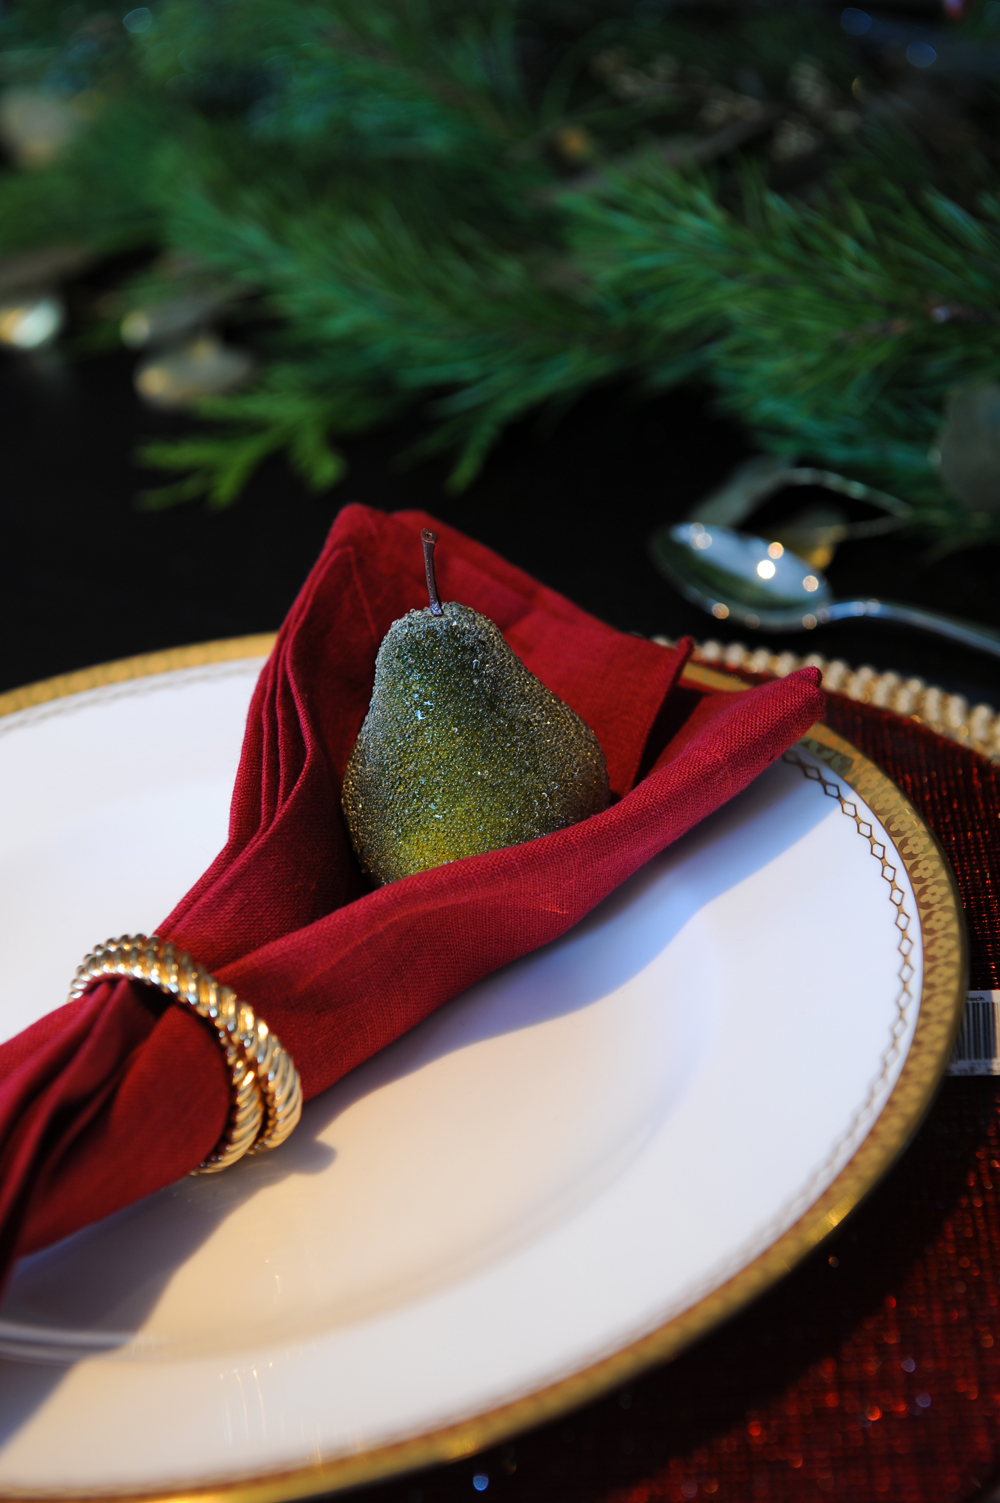 Jeweled pear on a table setting